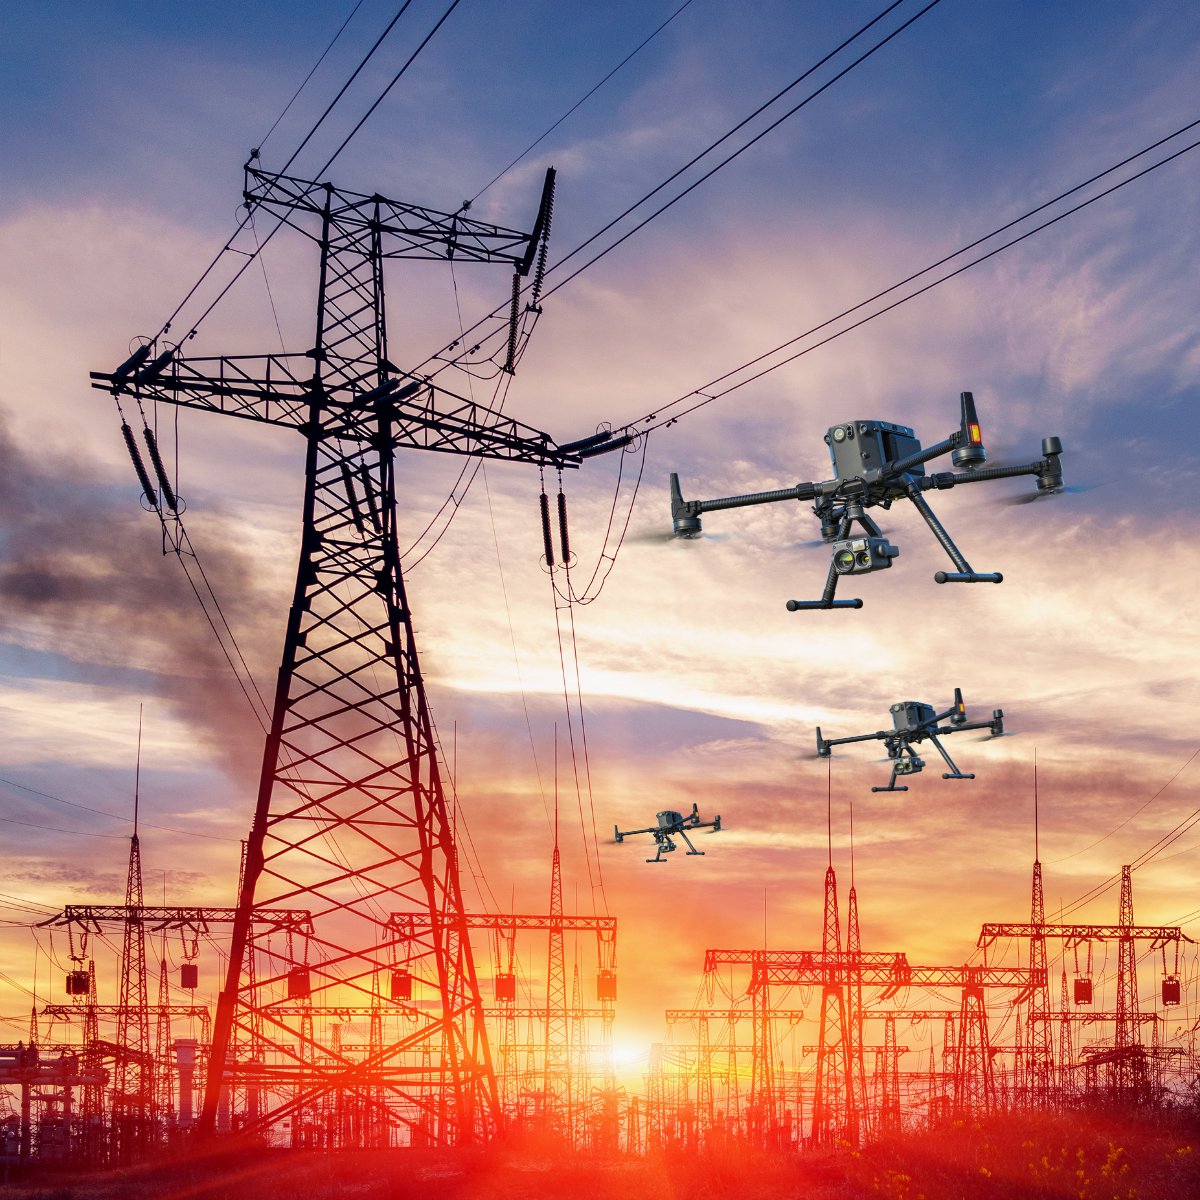 Power Industry Leading the Way: Linear asset inspections using drones